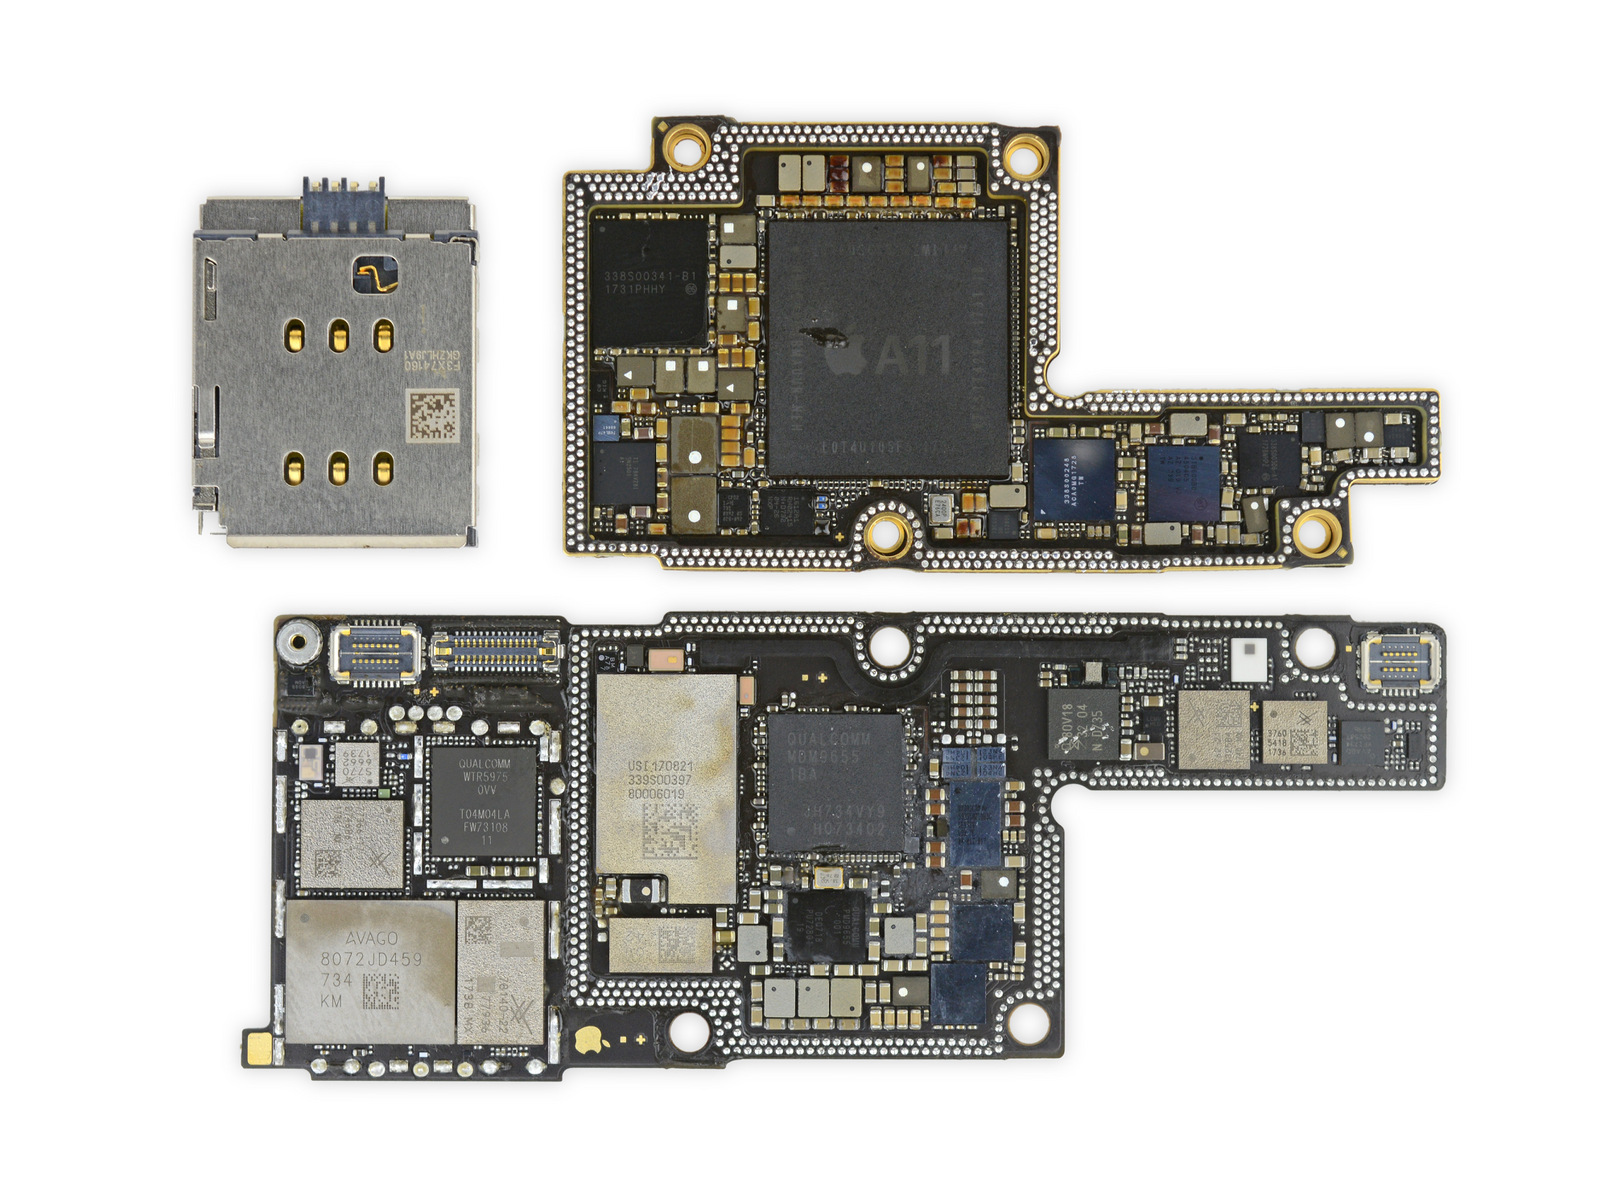 Og hold Videnskab skrue iFixit's iPhone X teardown finds two battery cells and an “unprecedented”  logic board | Ars Technica